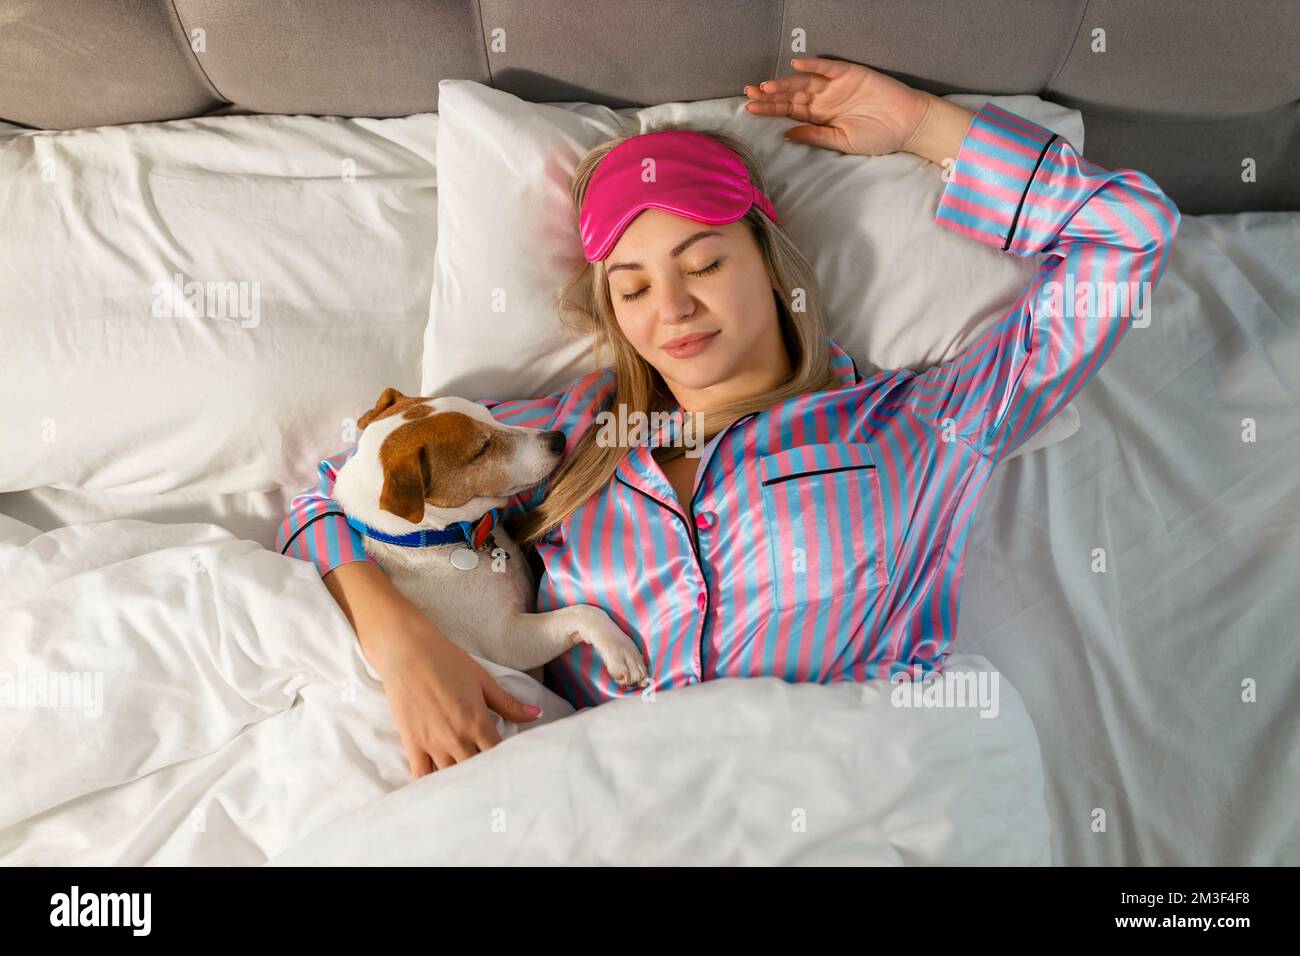 An attractive young woman wearing pajamas is holding a dog while laying on a bed Stock Photo